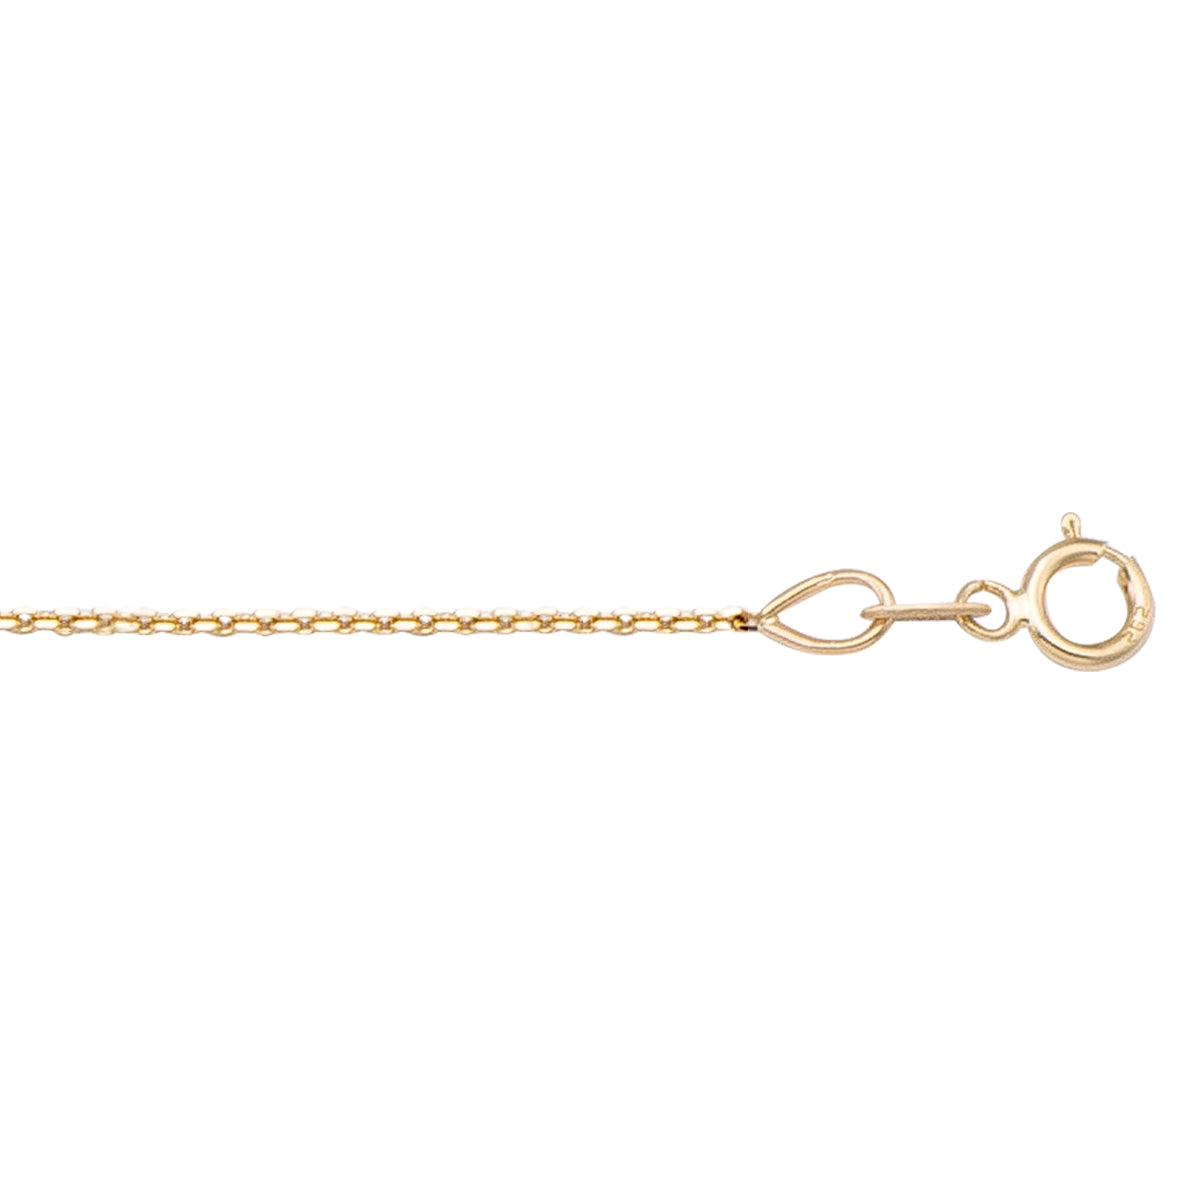 CHAINS YELLOW GOLD SOLID DIAMOND CUT OPEN CABLE LINK 